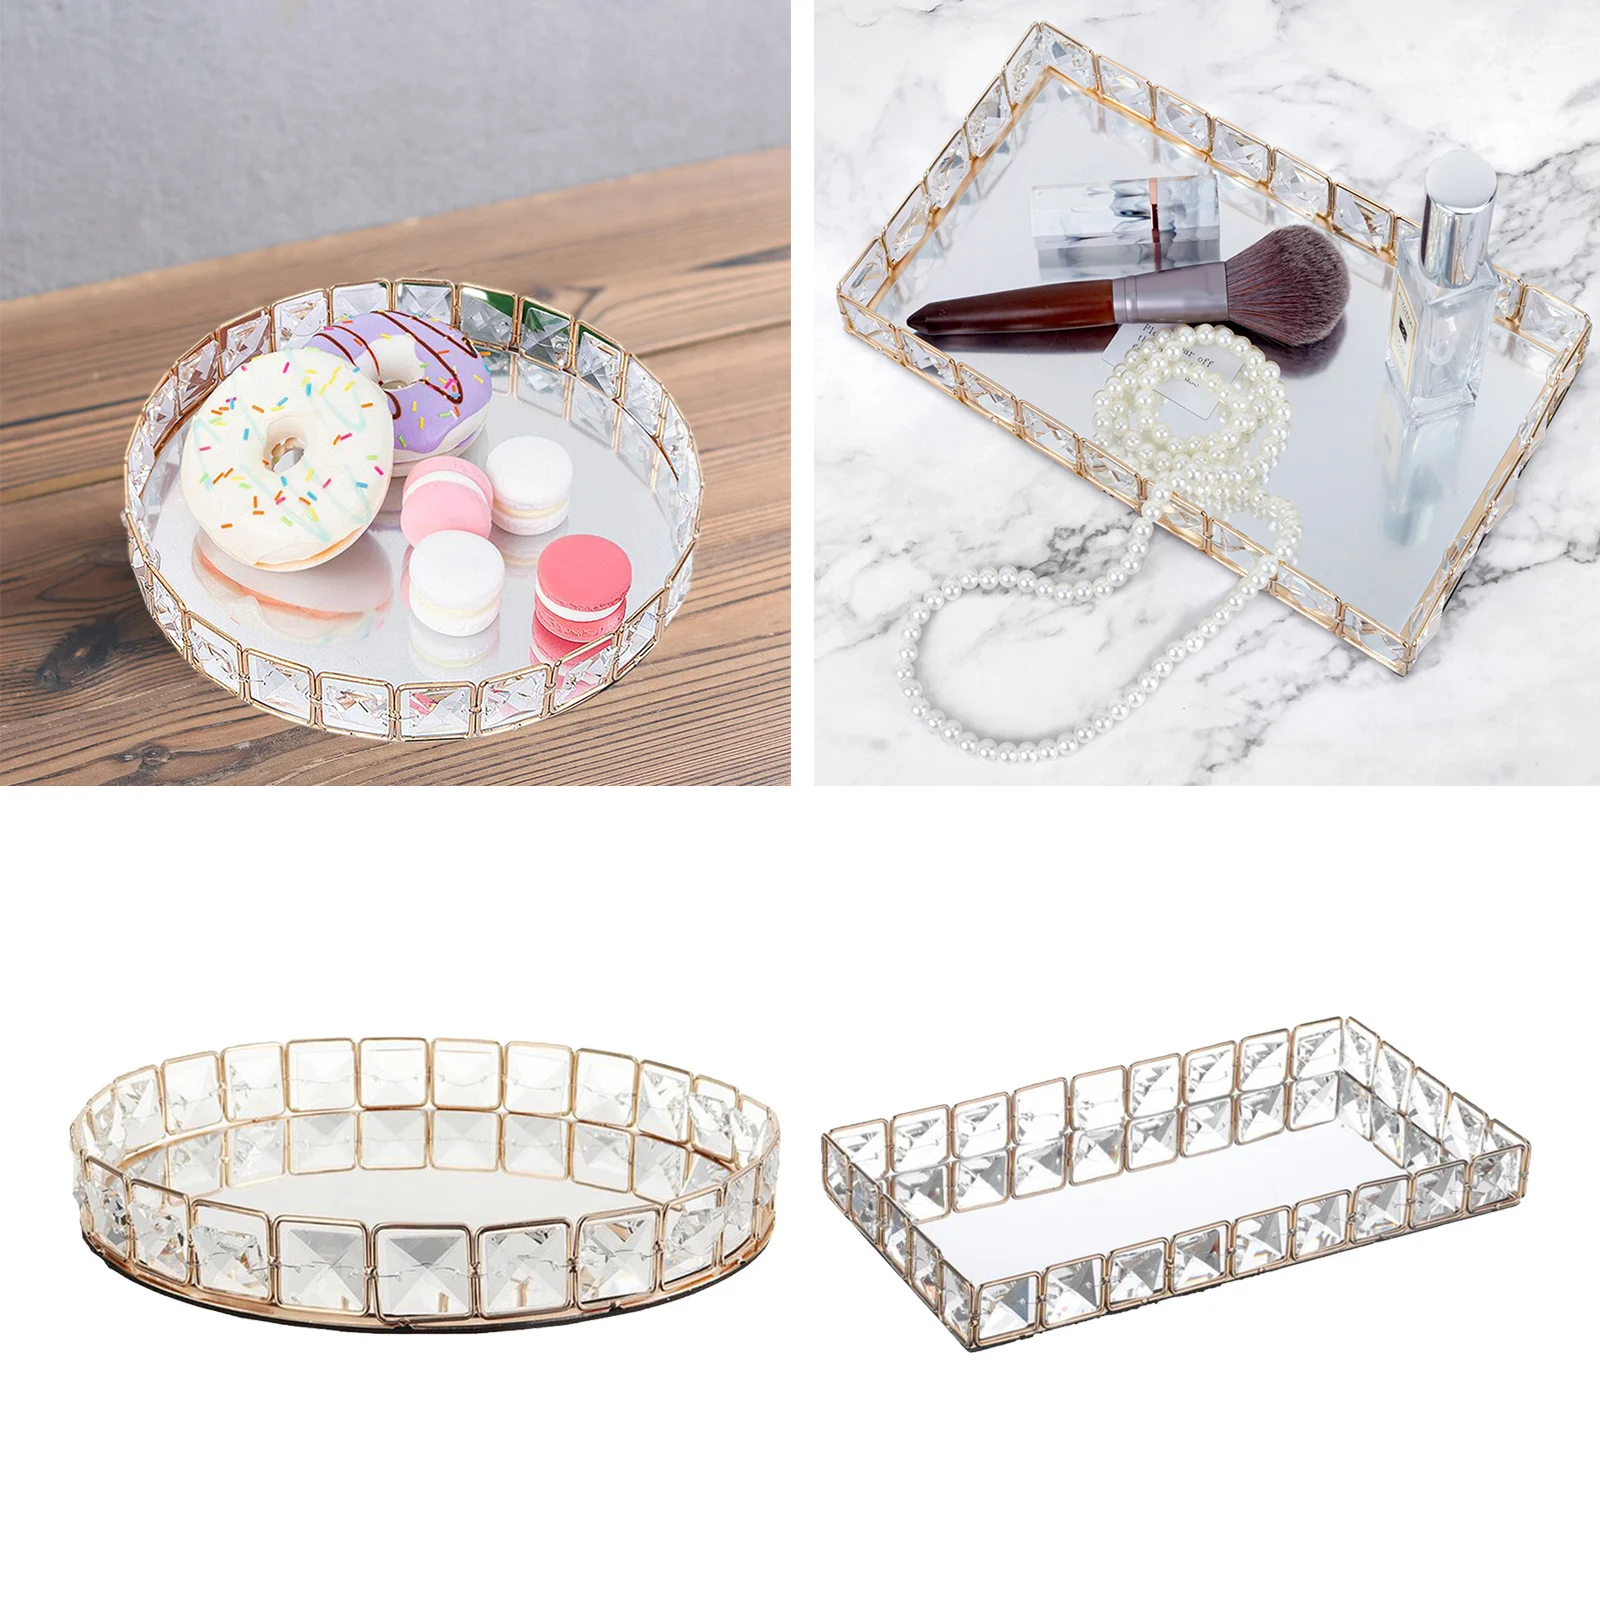 Mirrored Crystal Cosmetic Tray Perfume Bottle Makeup Table Vanity Organizer Storage Platter Serving Tray Tealight Holder